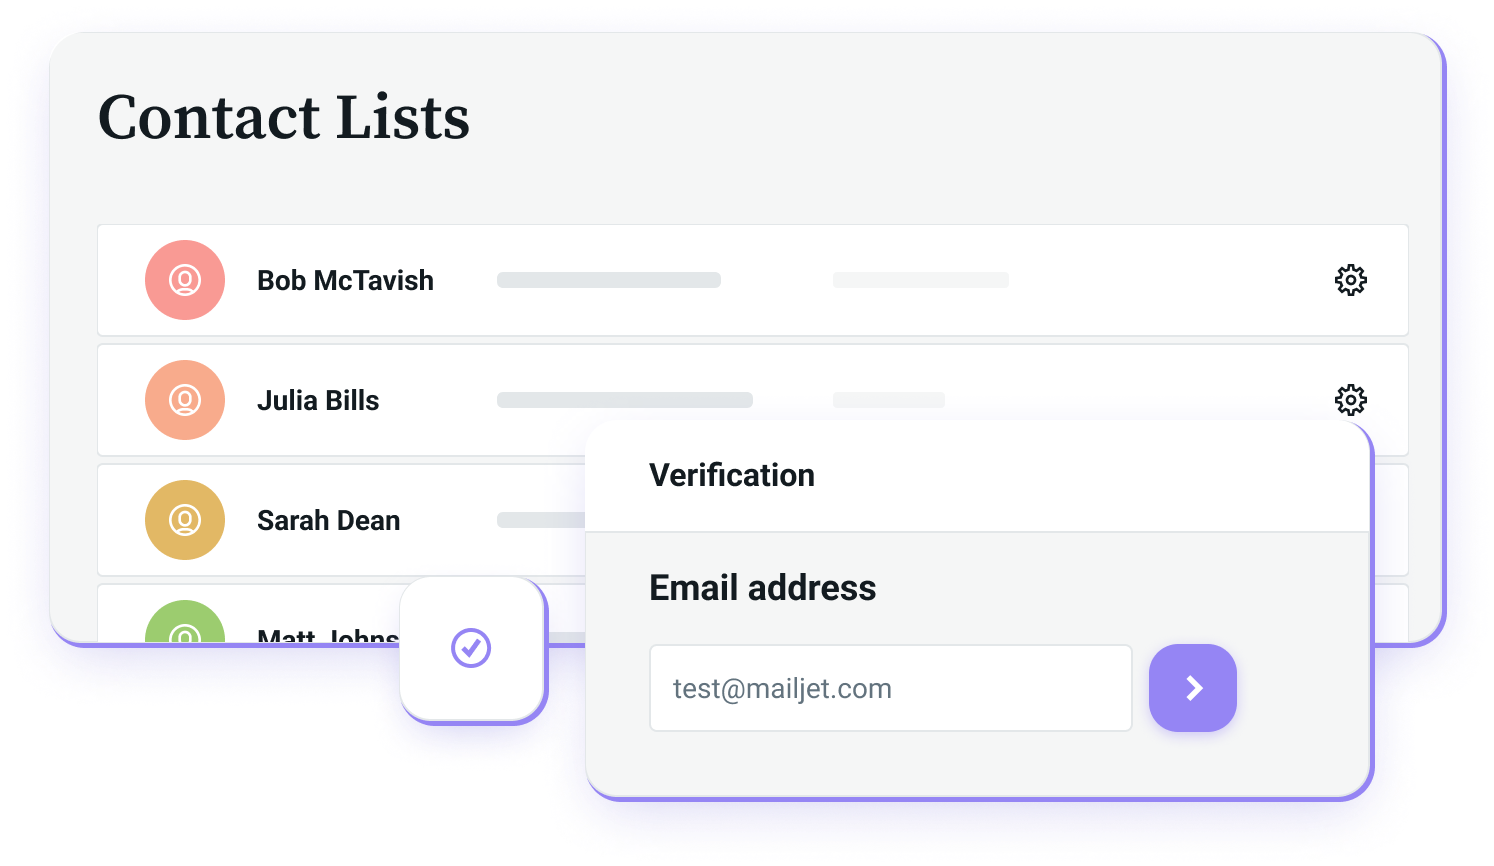 Contact list with form validation.